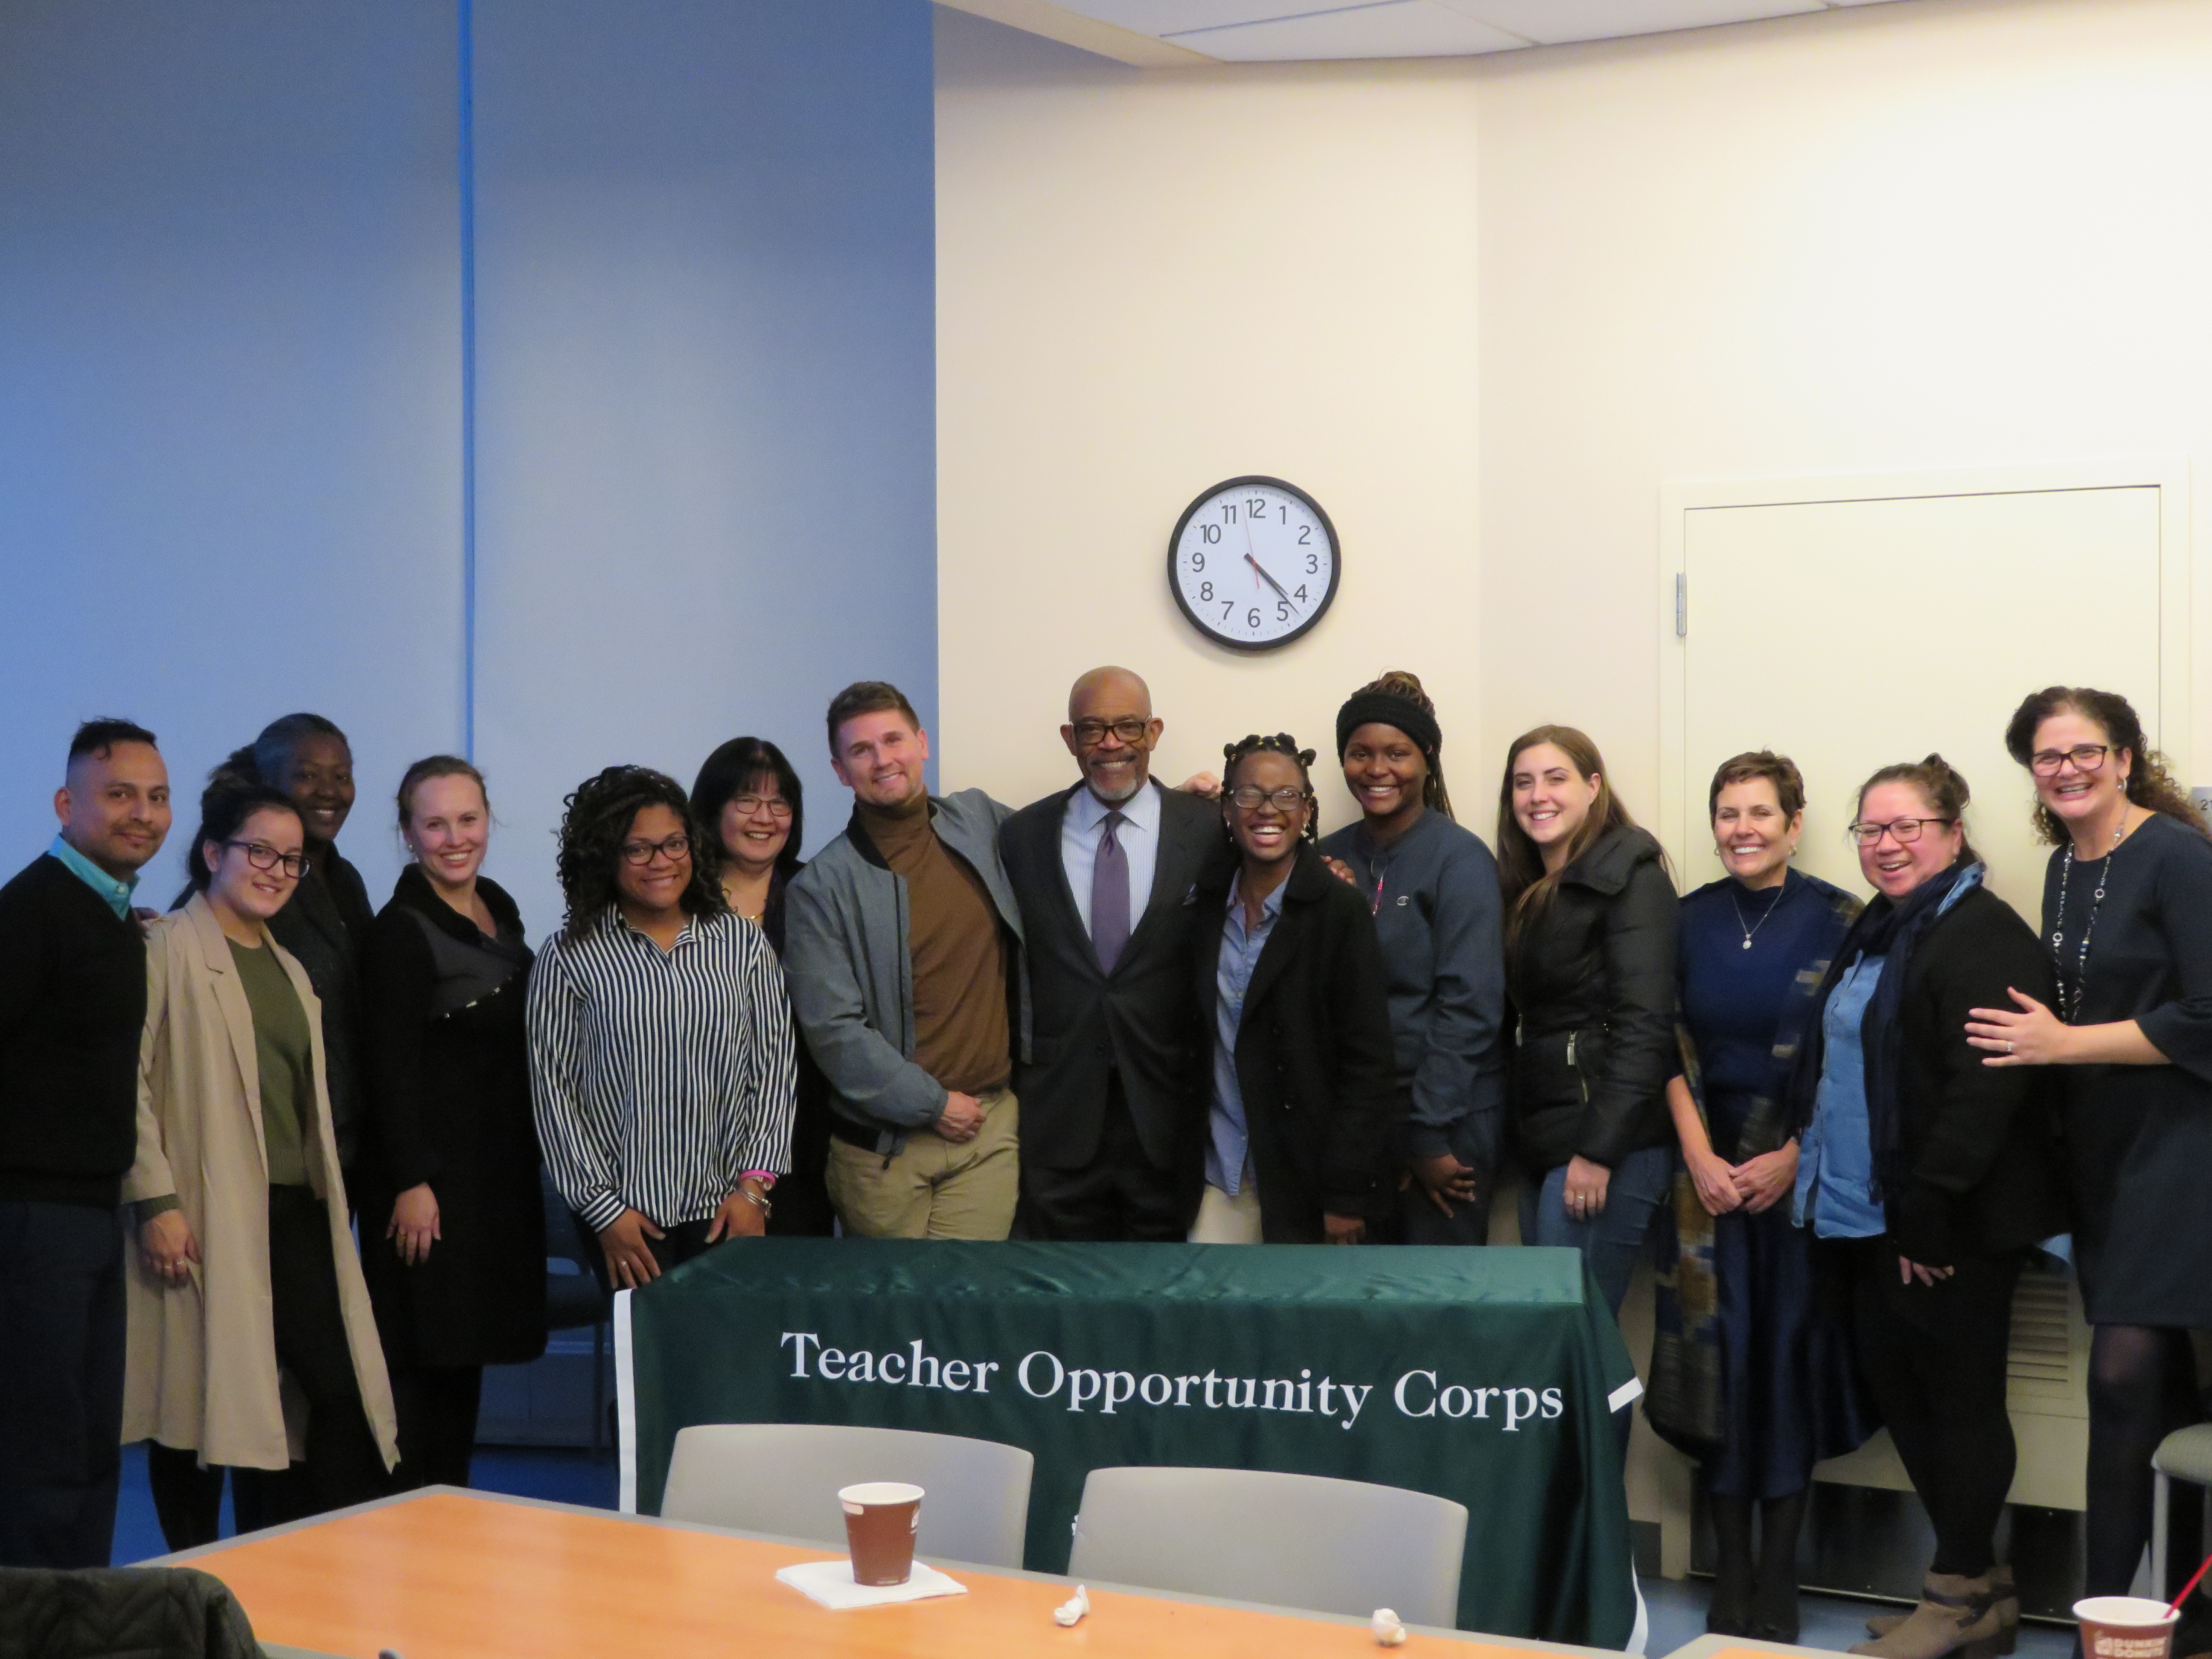 Regent Young vists with educators and students at SUNY Old Westbury